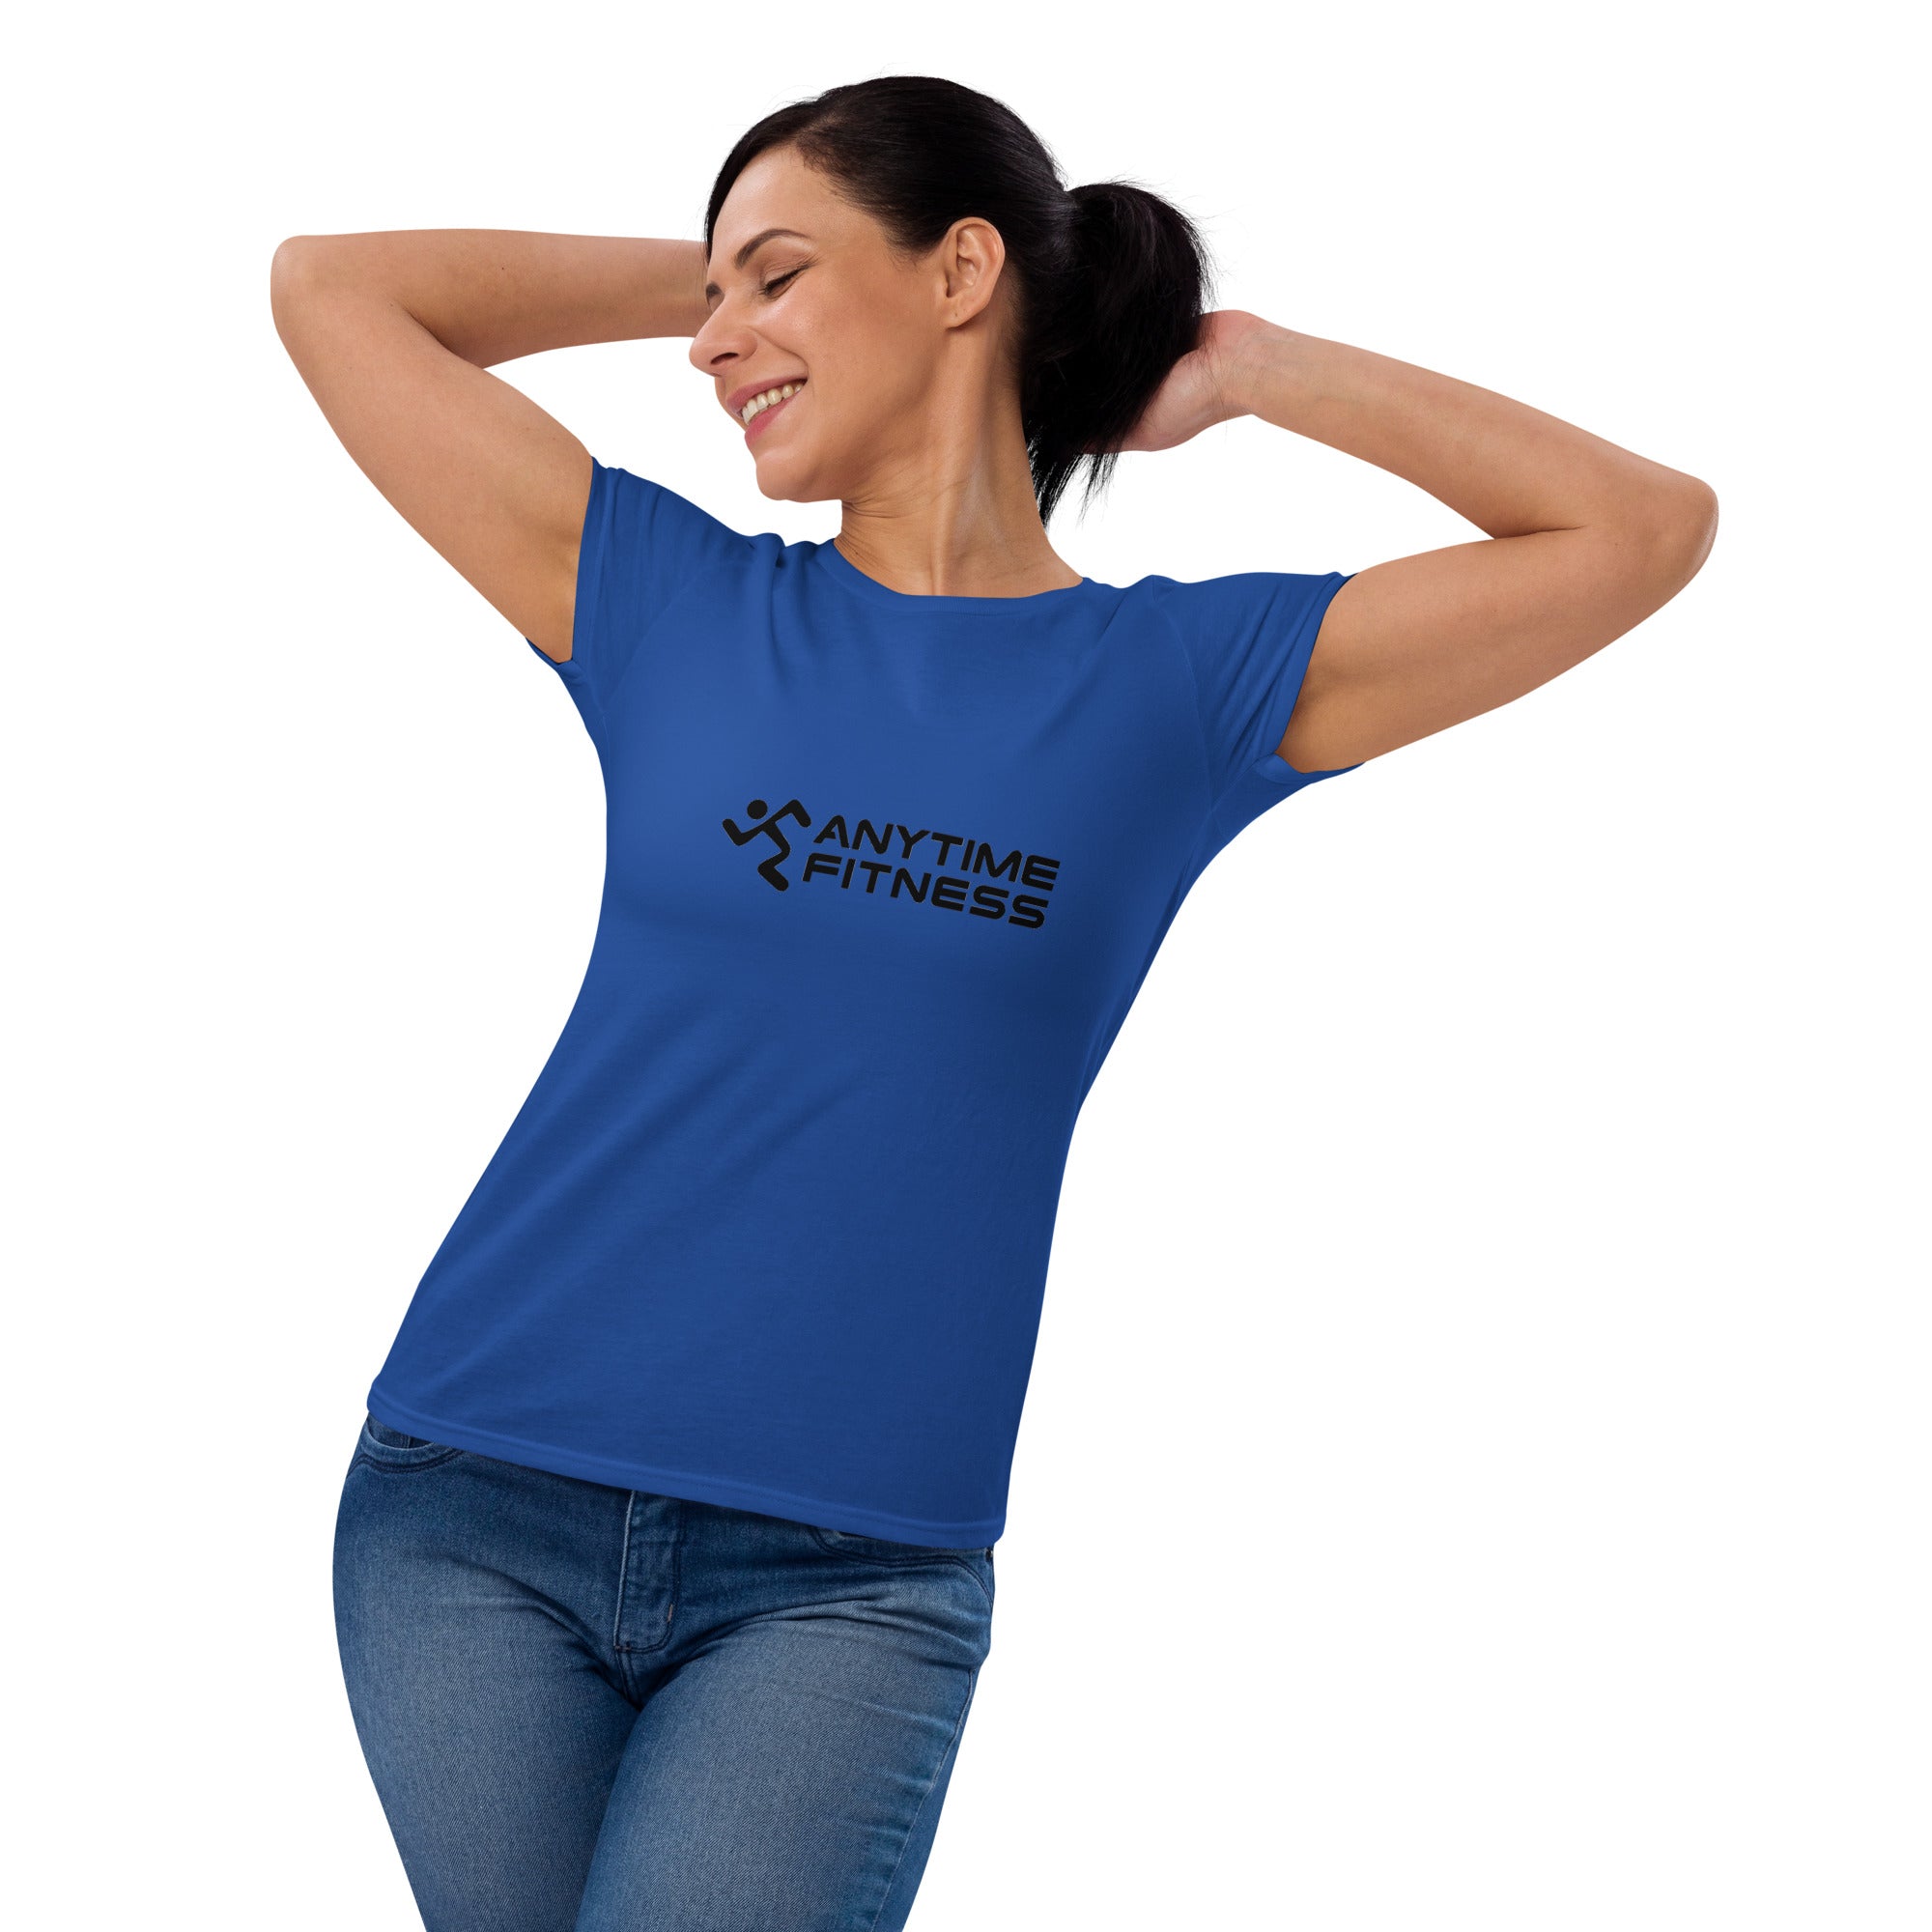 Any Time Fitness Women's short sleeve t-shirt